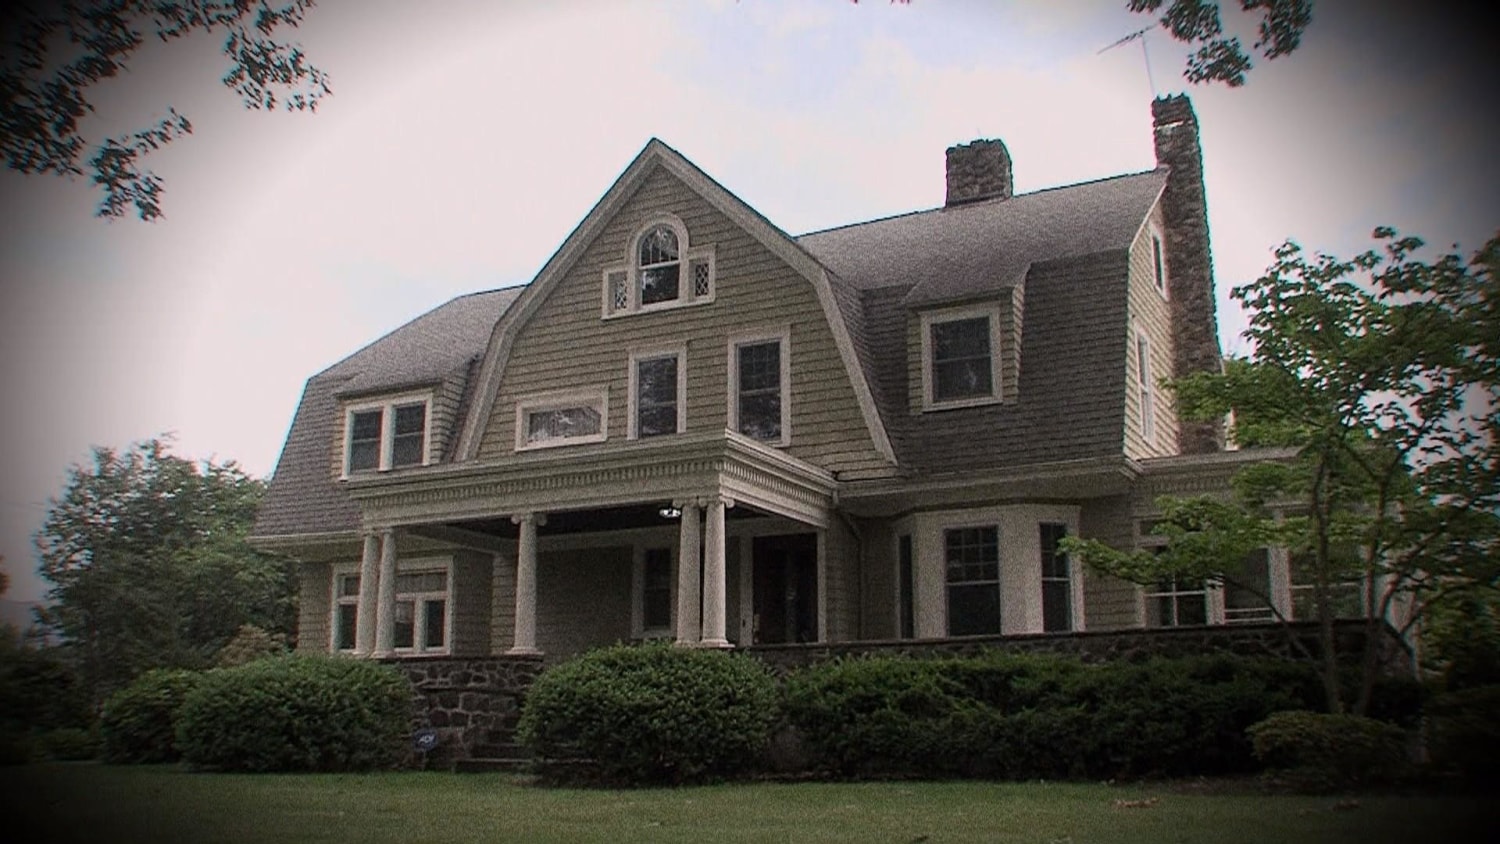 Netflix Filmed The Watcher In NY! Want To See the Series House?